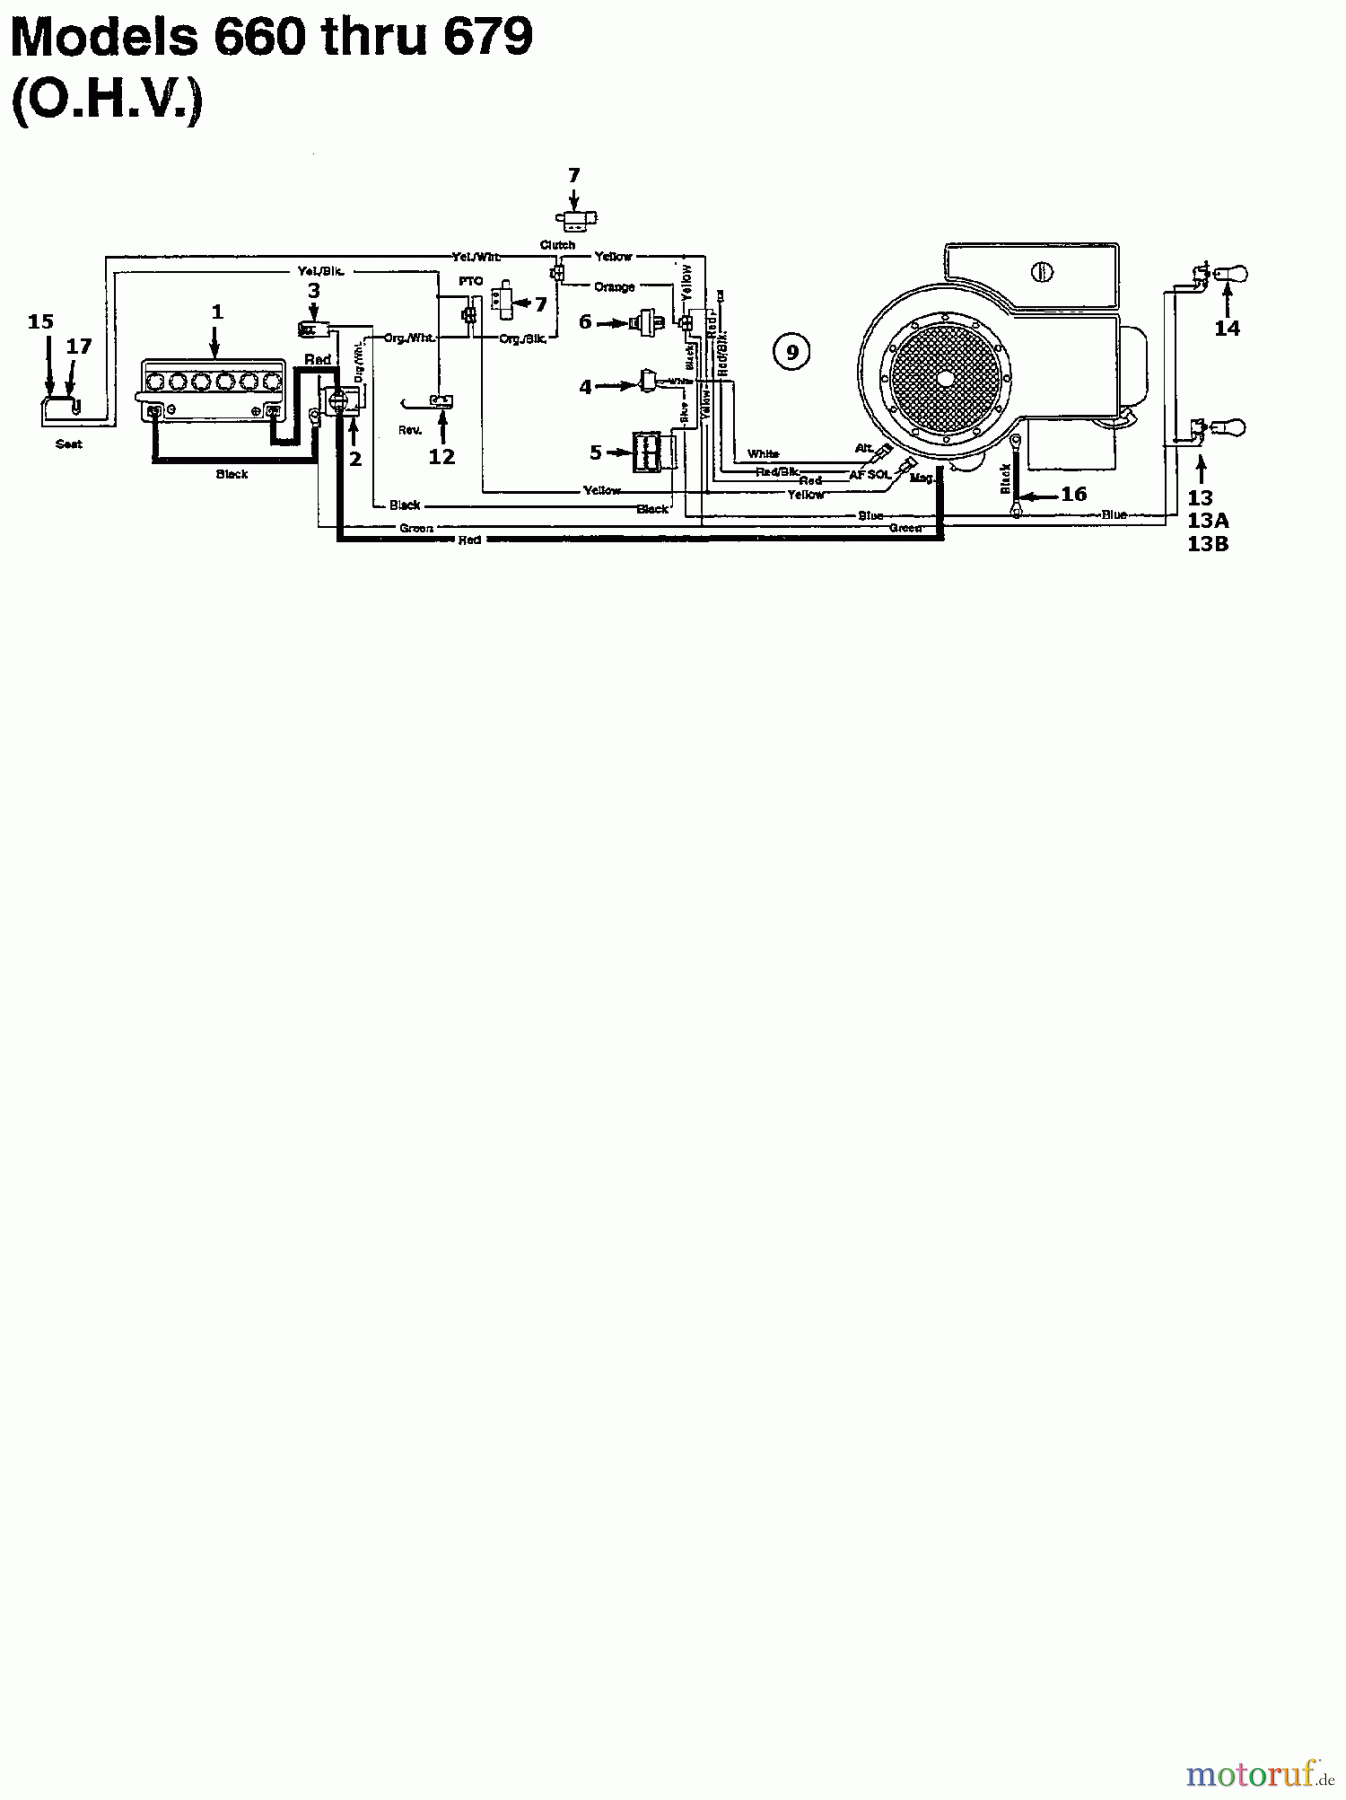  Columbia Lawn tractors 125/76 N 135L661C626  (1995) Wiring diagram for O.H.V.